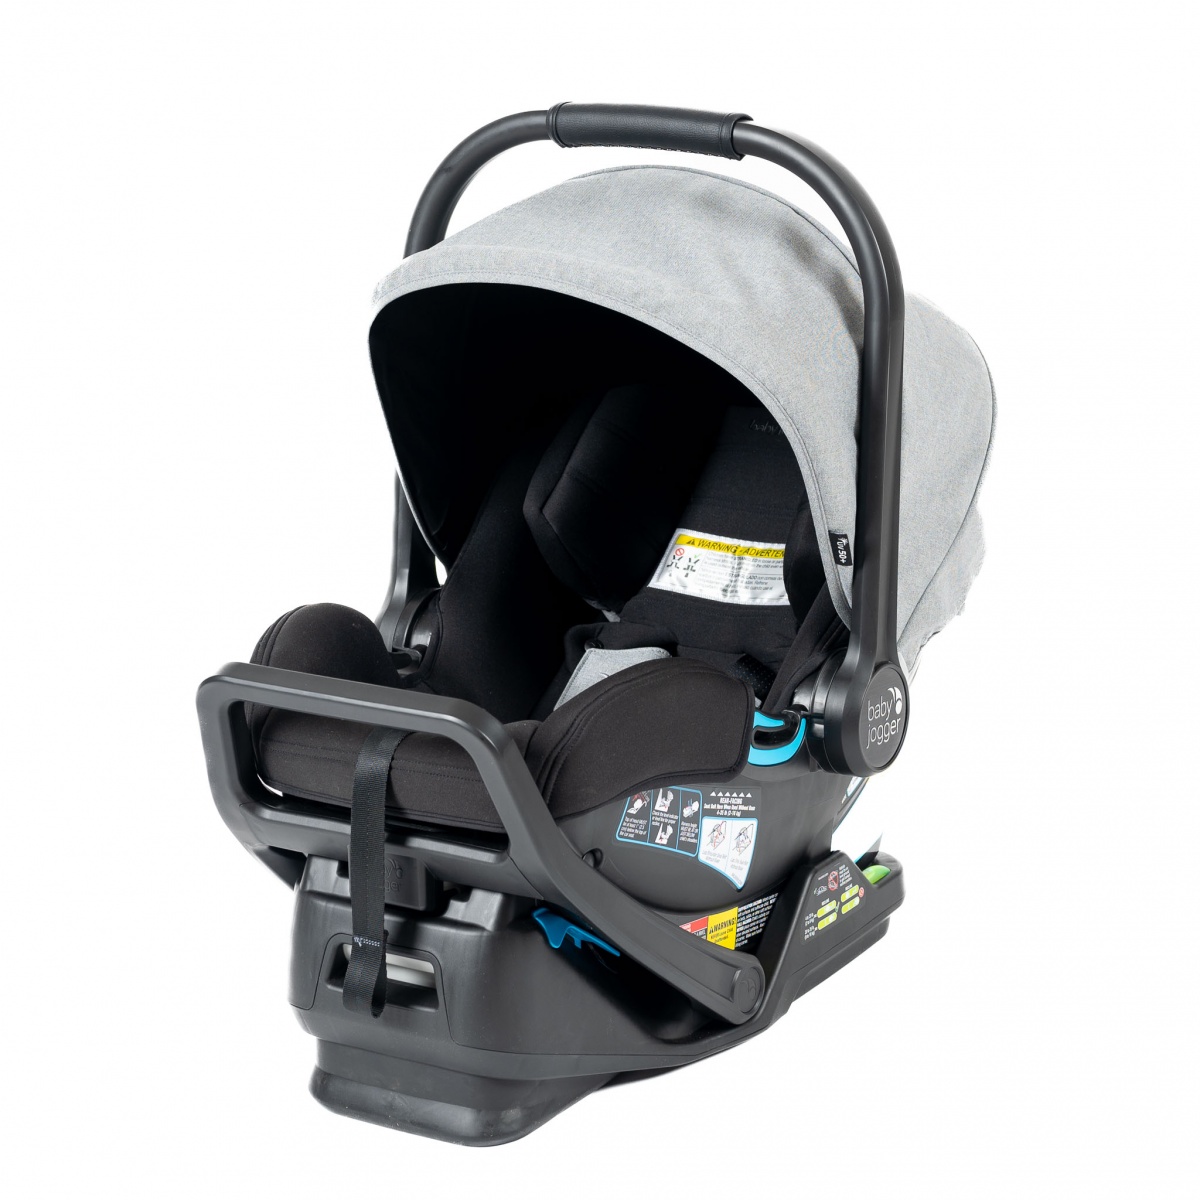 Baby Jogger City GO2 Review